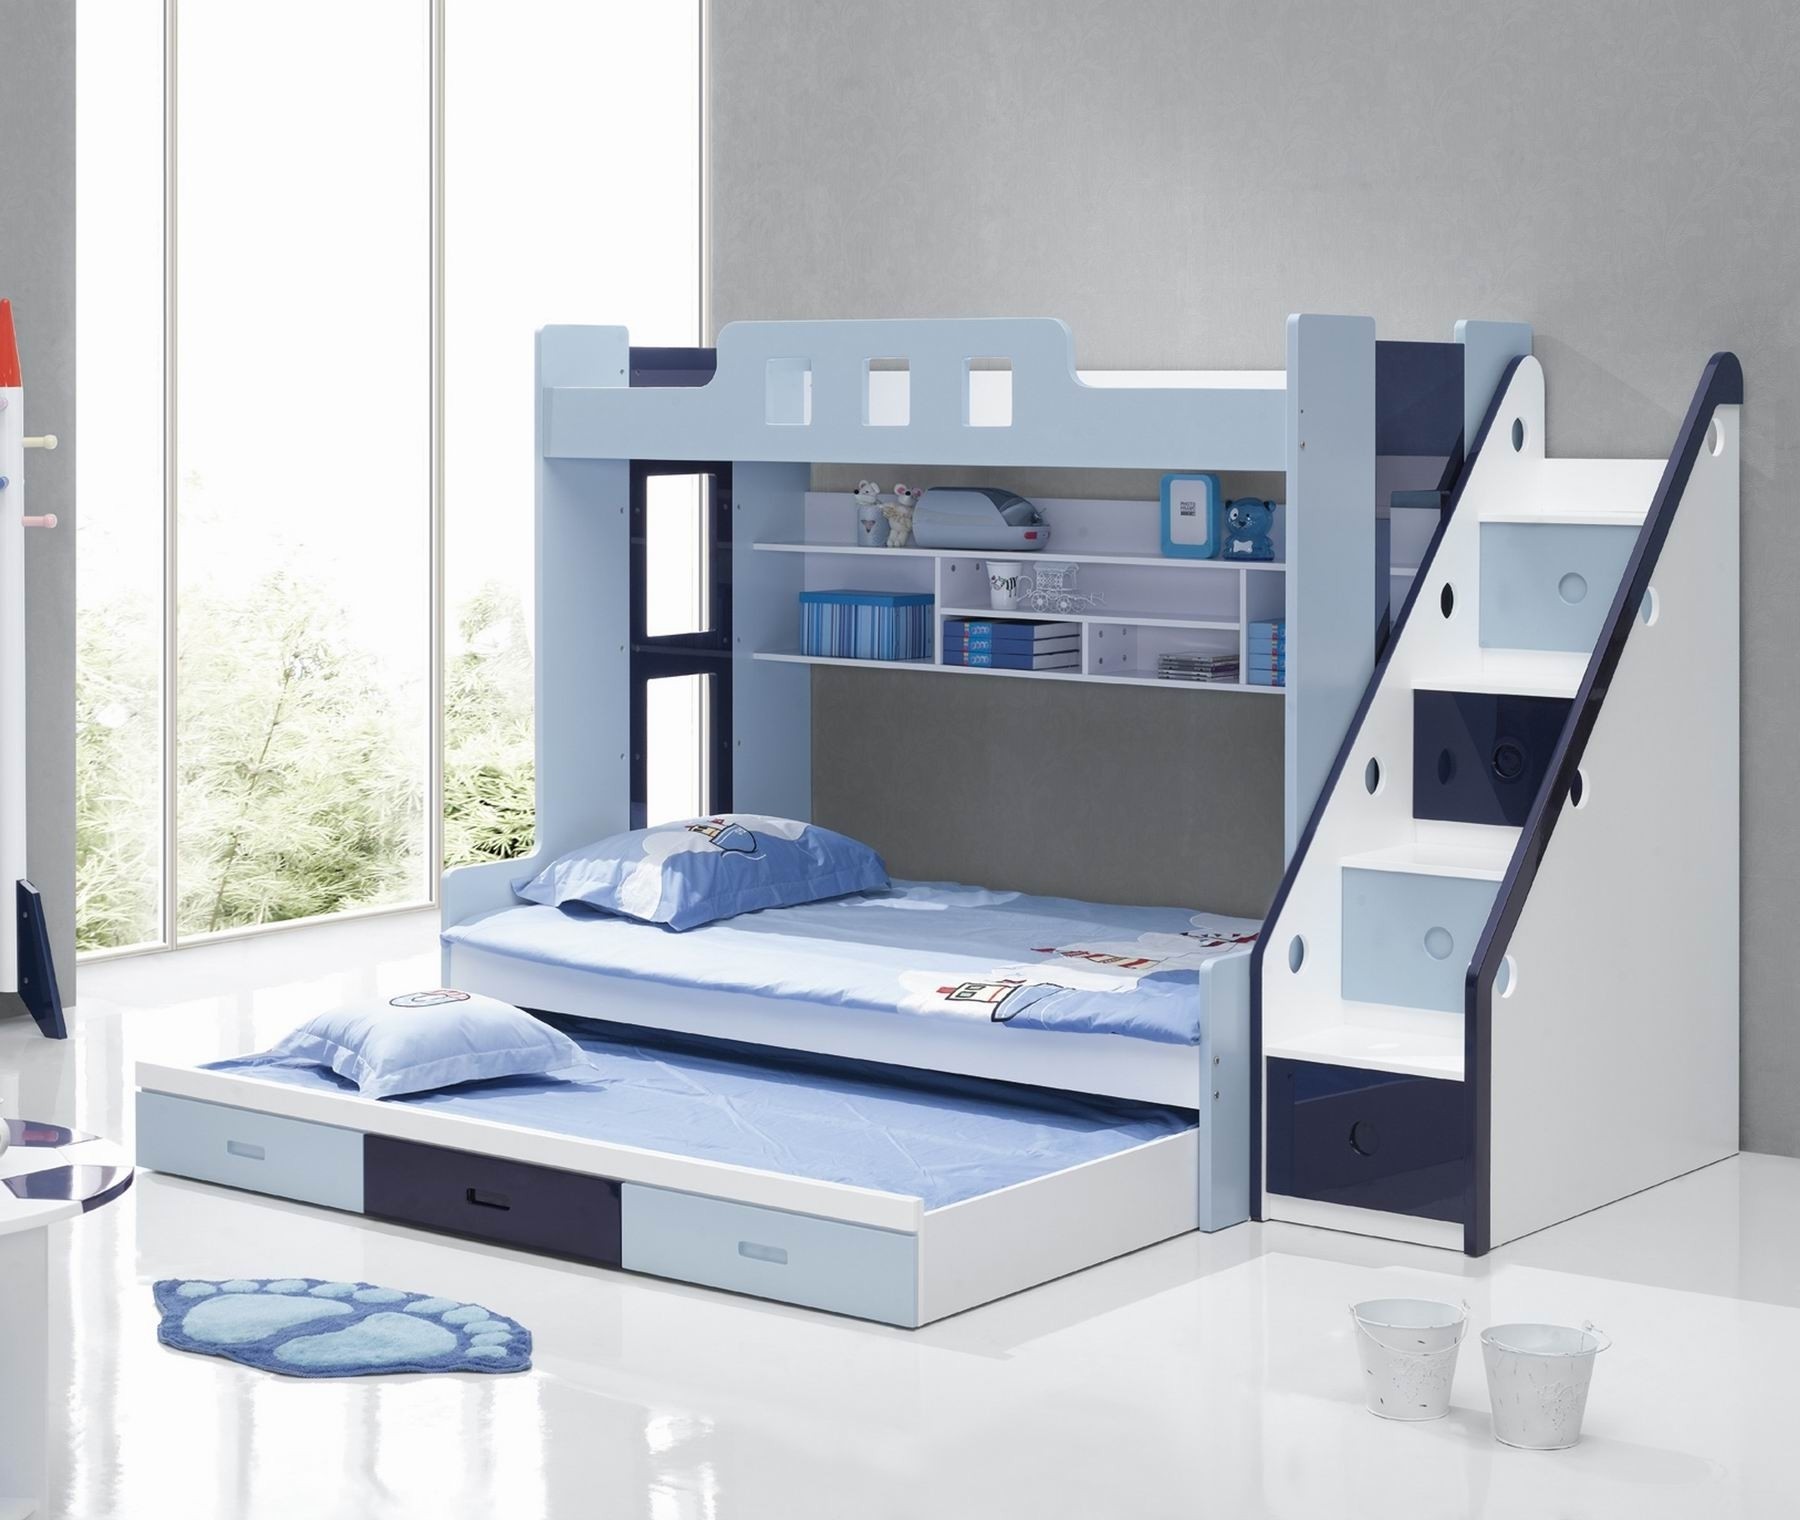 Kids bunk beds with 3 drawer storage under bed and